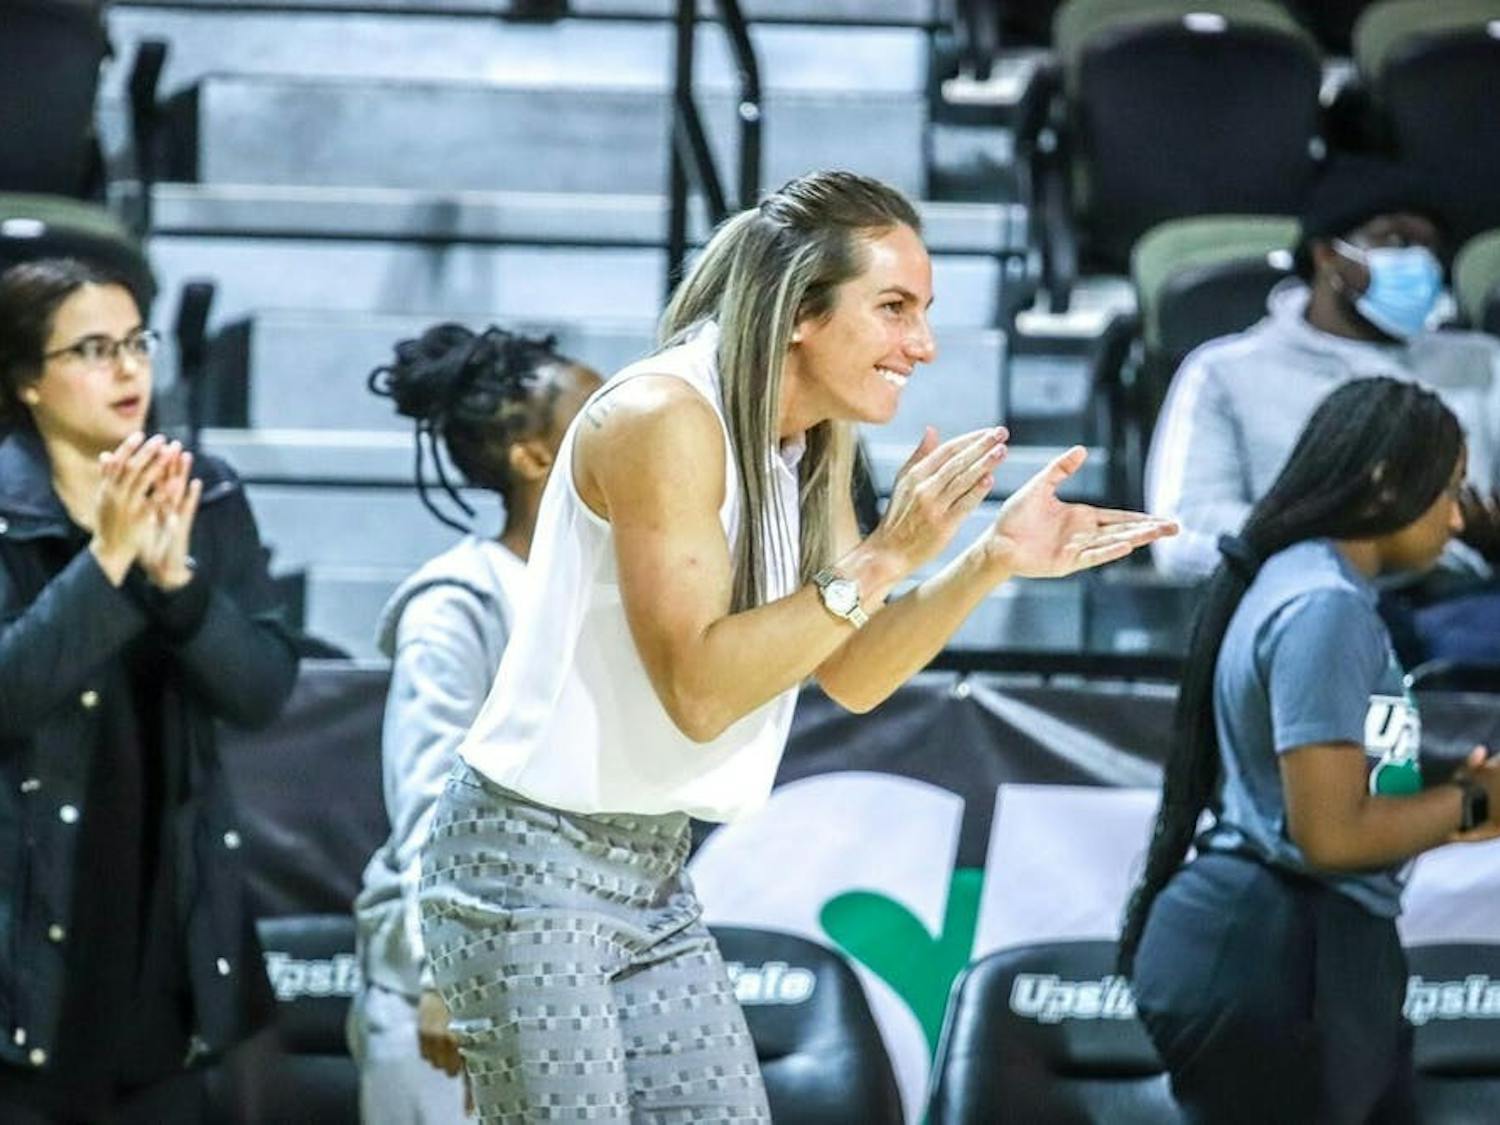 Burke was hired prior to last season, leading the Bulls to a 12-16 record in her first year.